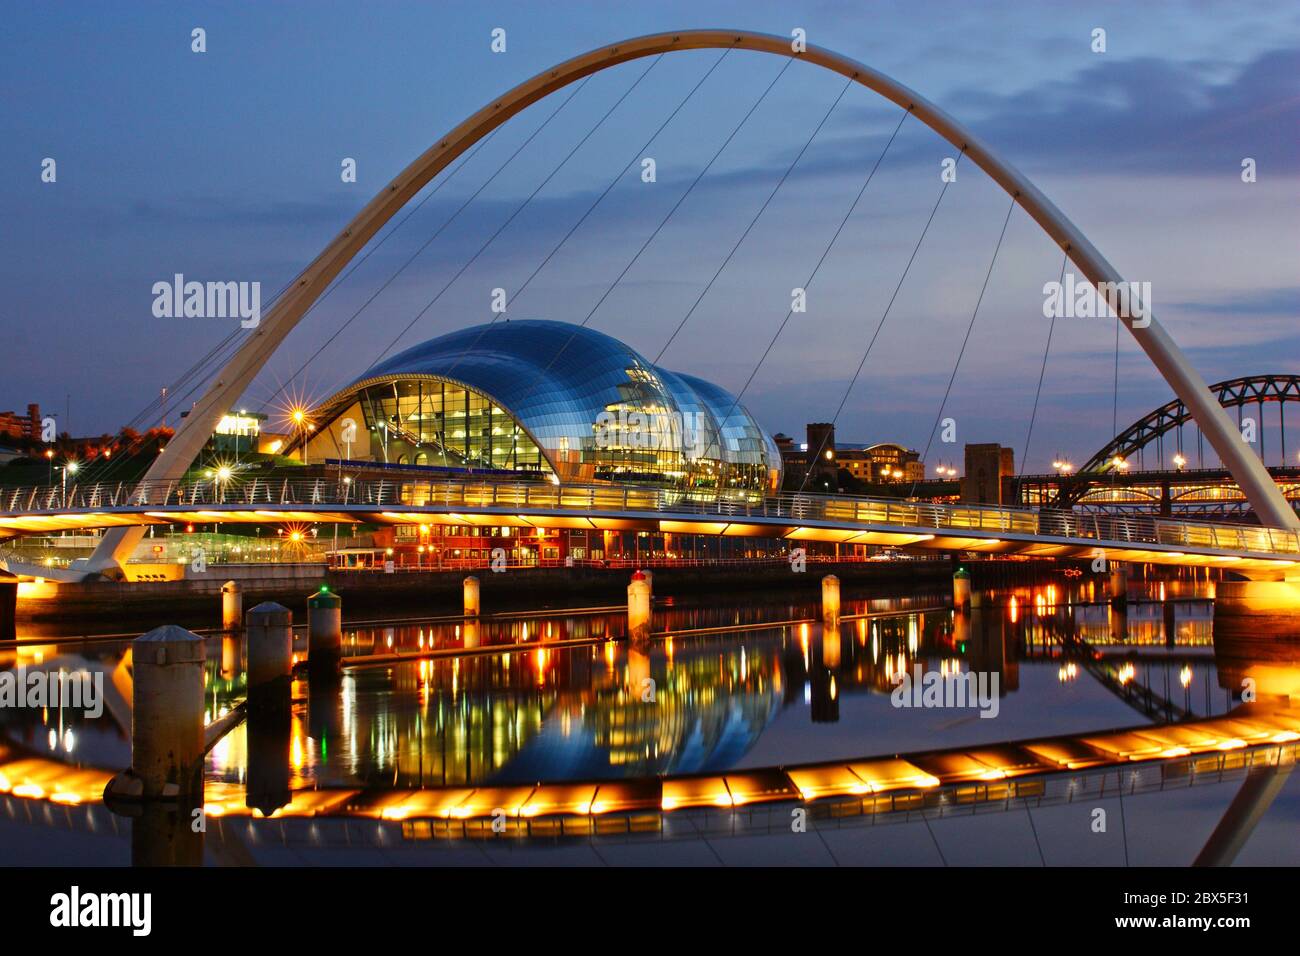 The Gateshead Millennium Bridge, Sage Centre and Newcastle's Tyne Bridge taken at dusk in the blue hour with lights reflected in the still river water Stock Photo